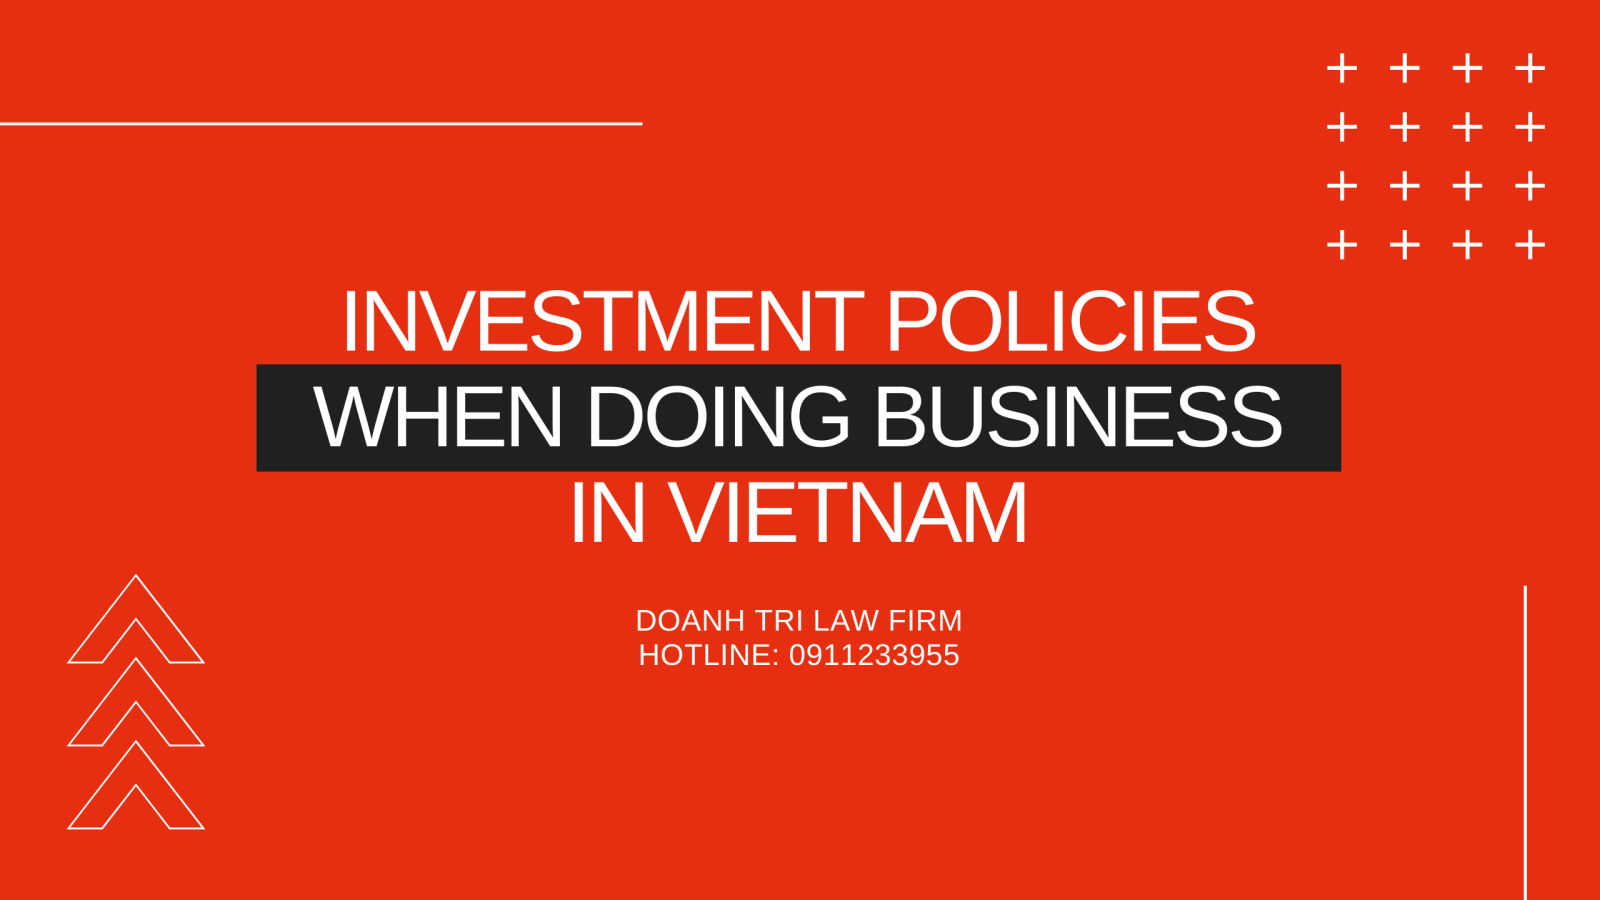 INVESTMENT POLICIES WHEN DOING BUSINESS IN VIETNAM 